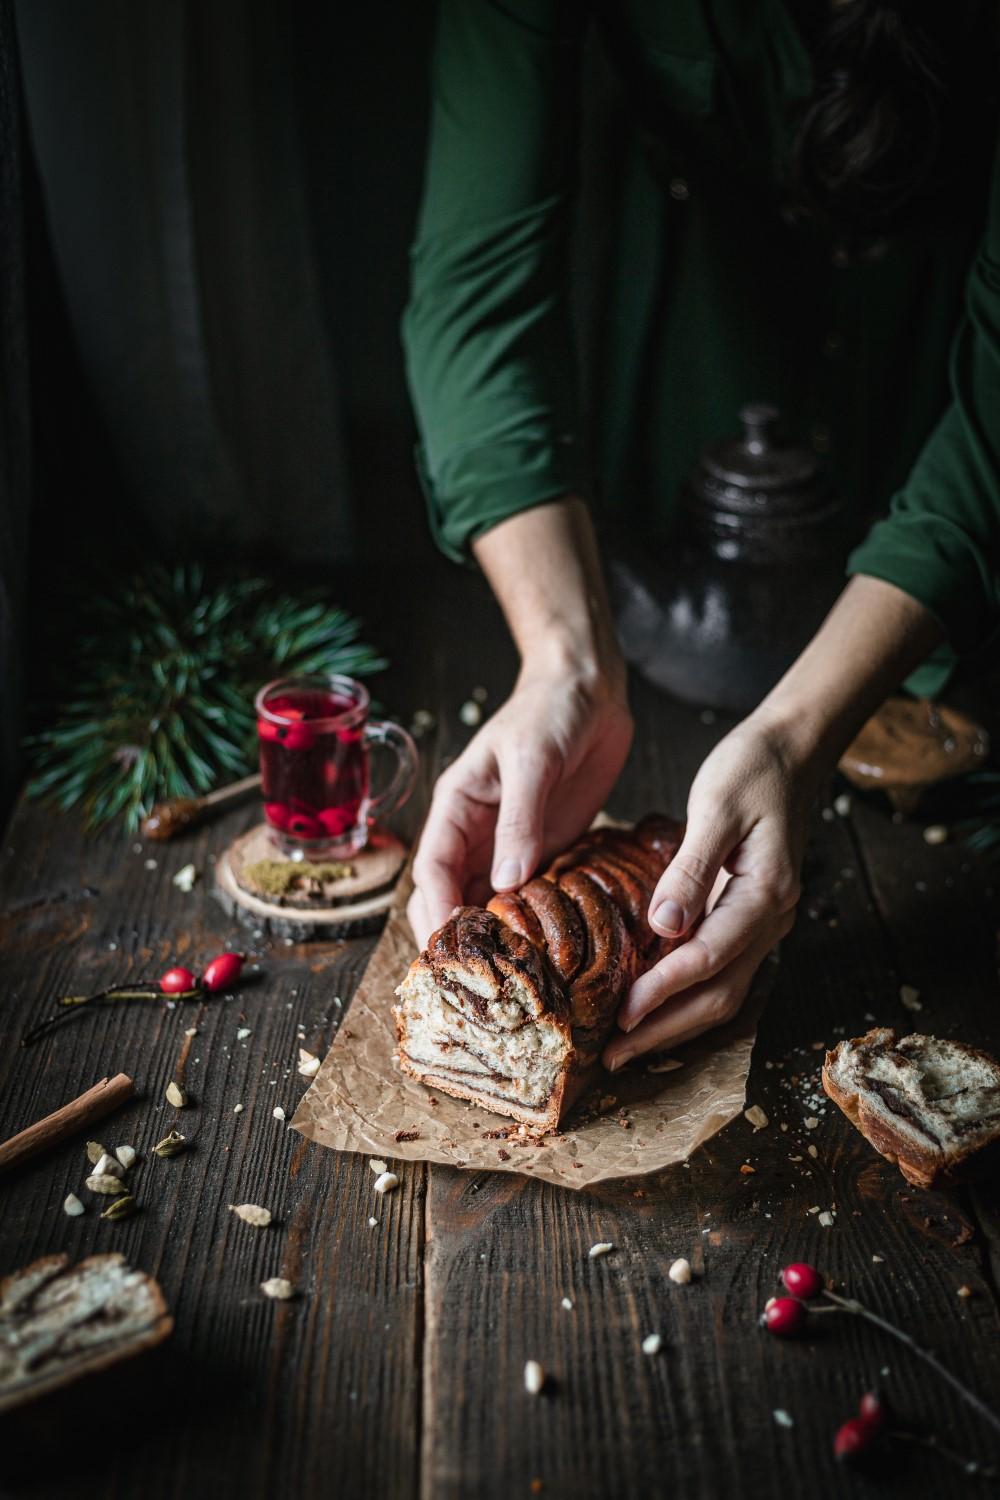 This delicious almond butter chocolate babka is made of rich sweet dough and creamy filling. It's so cozy and homey. A perfect Christmas treat that everyone will love.